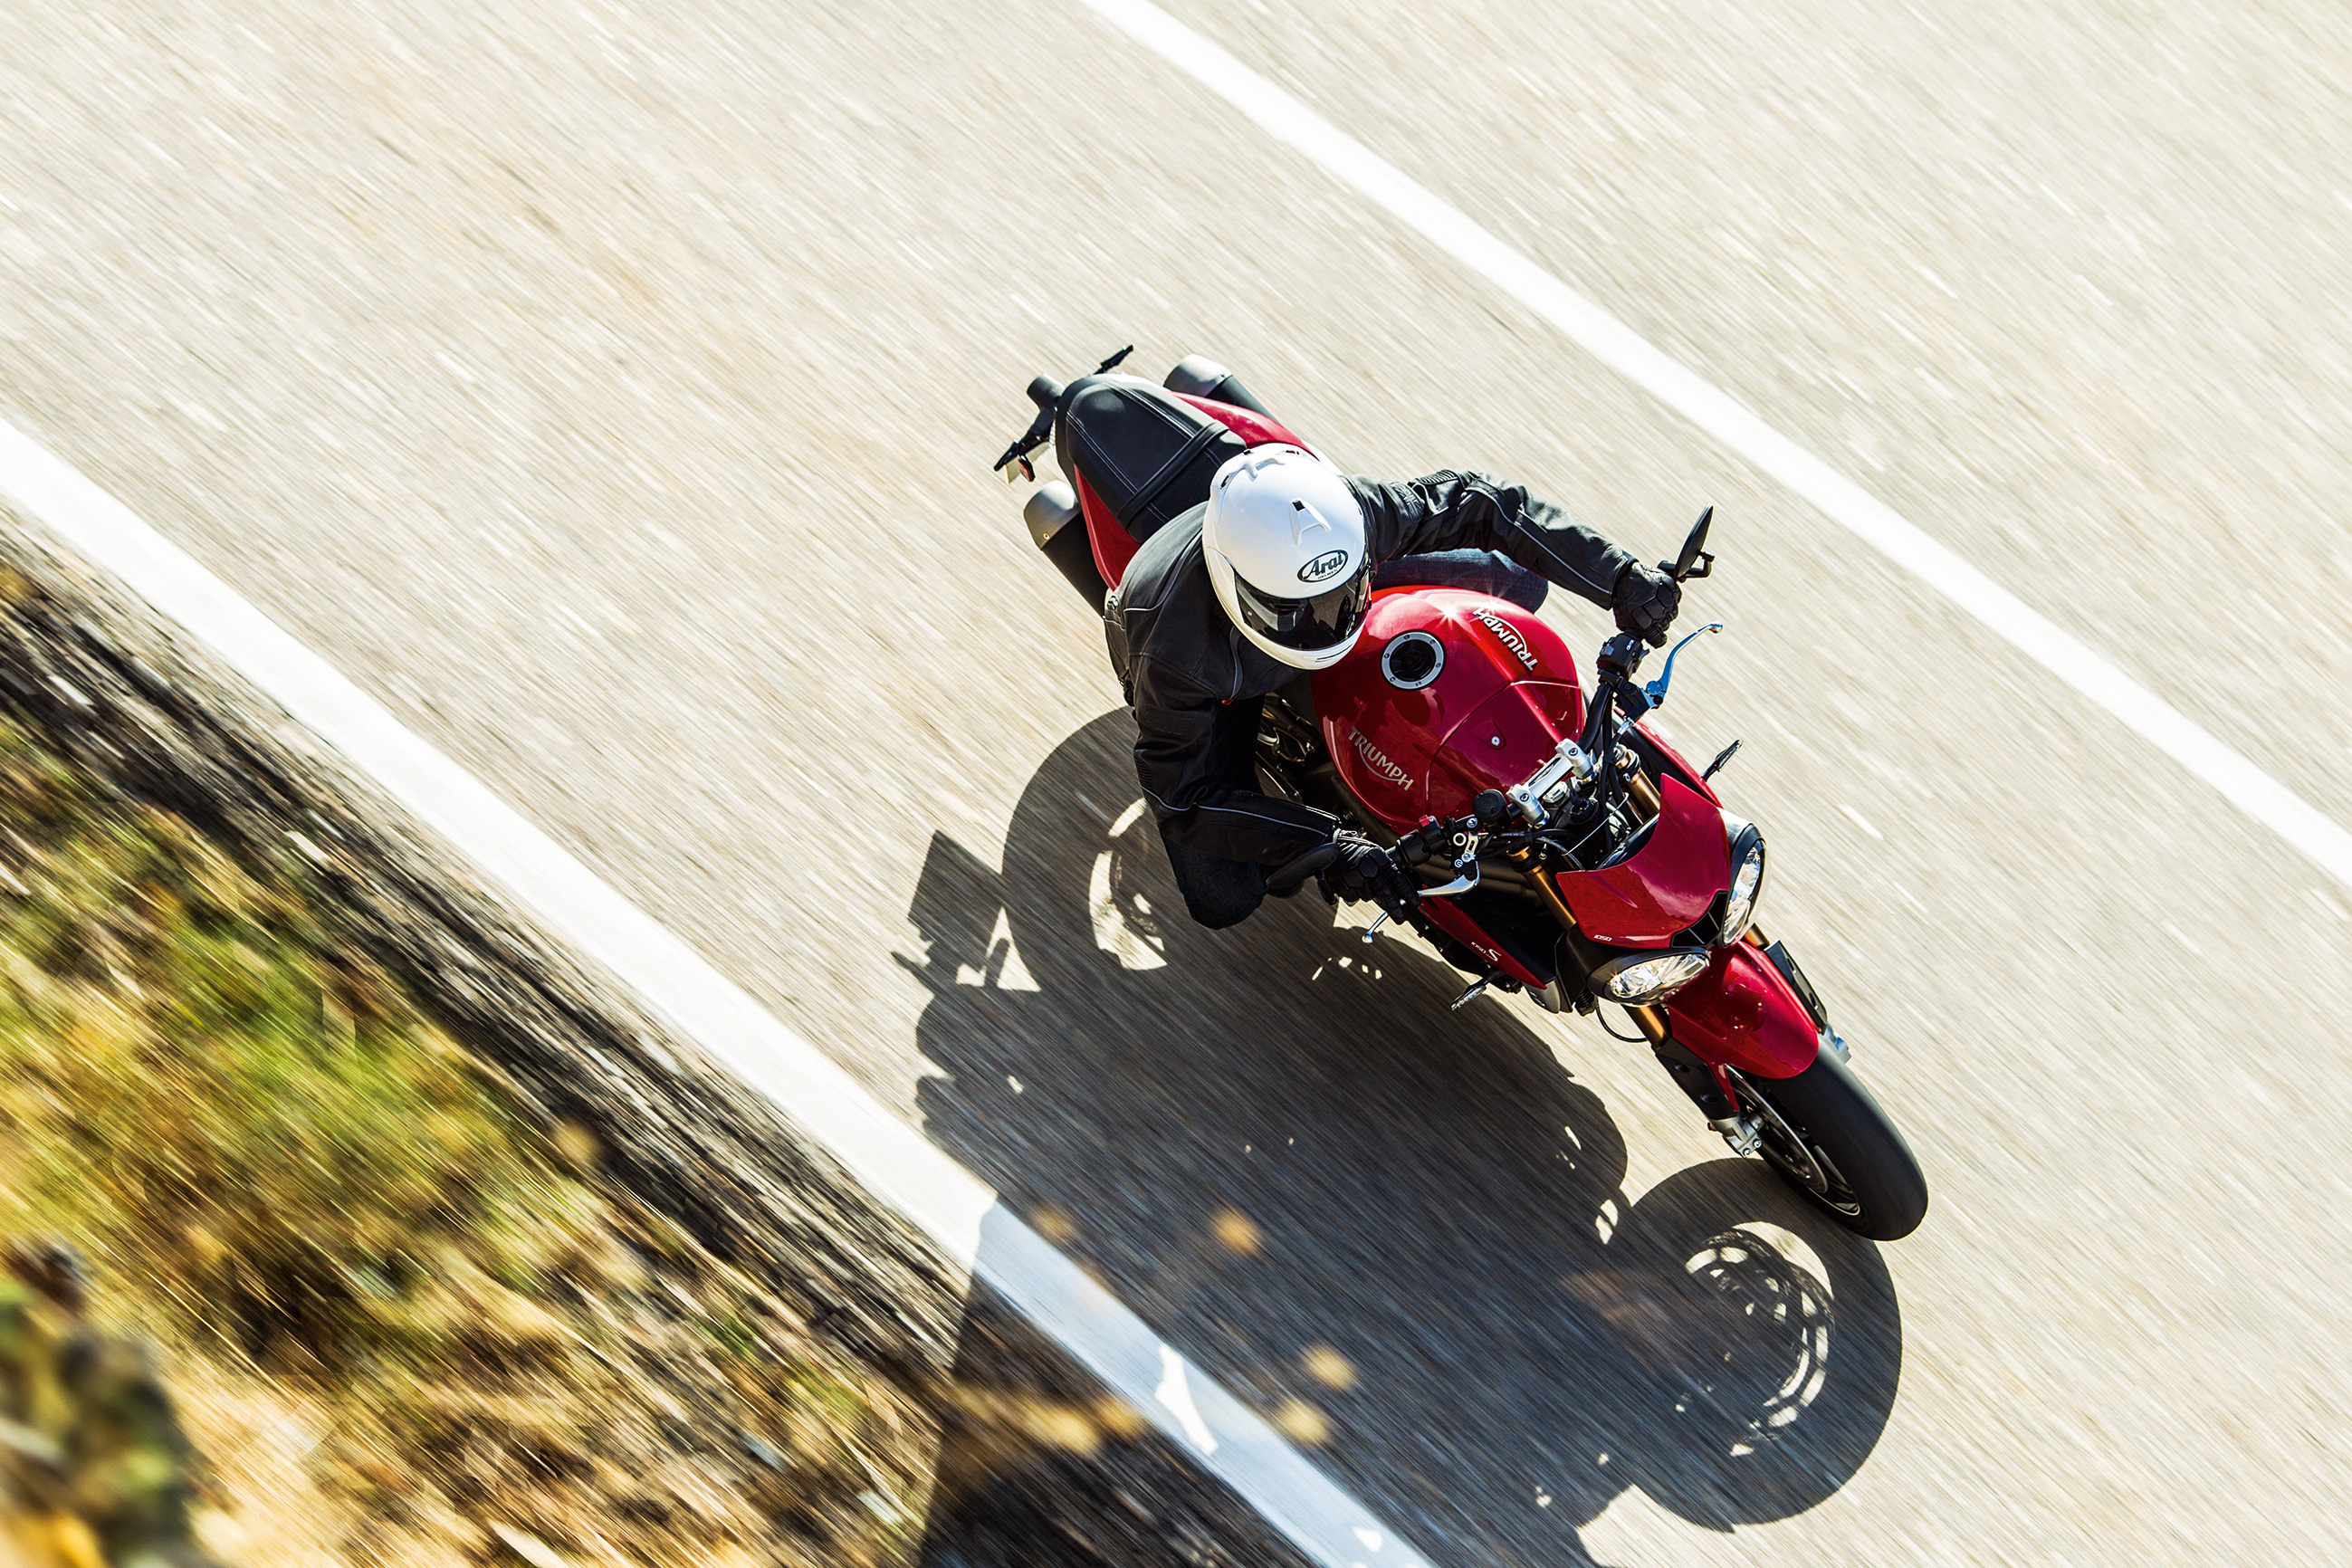 Here's the new Triumph Speed Triple in action